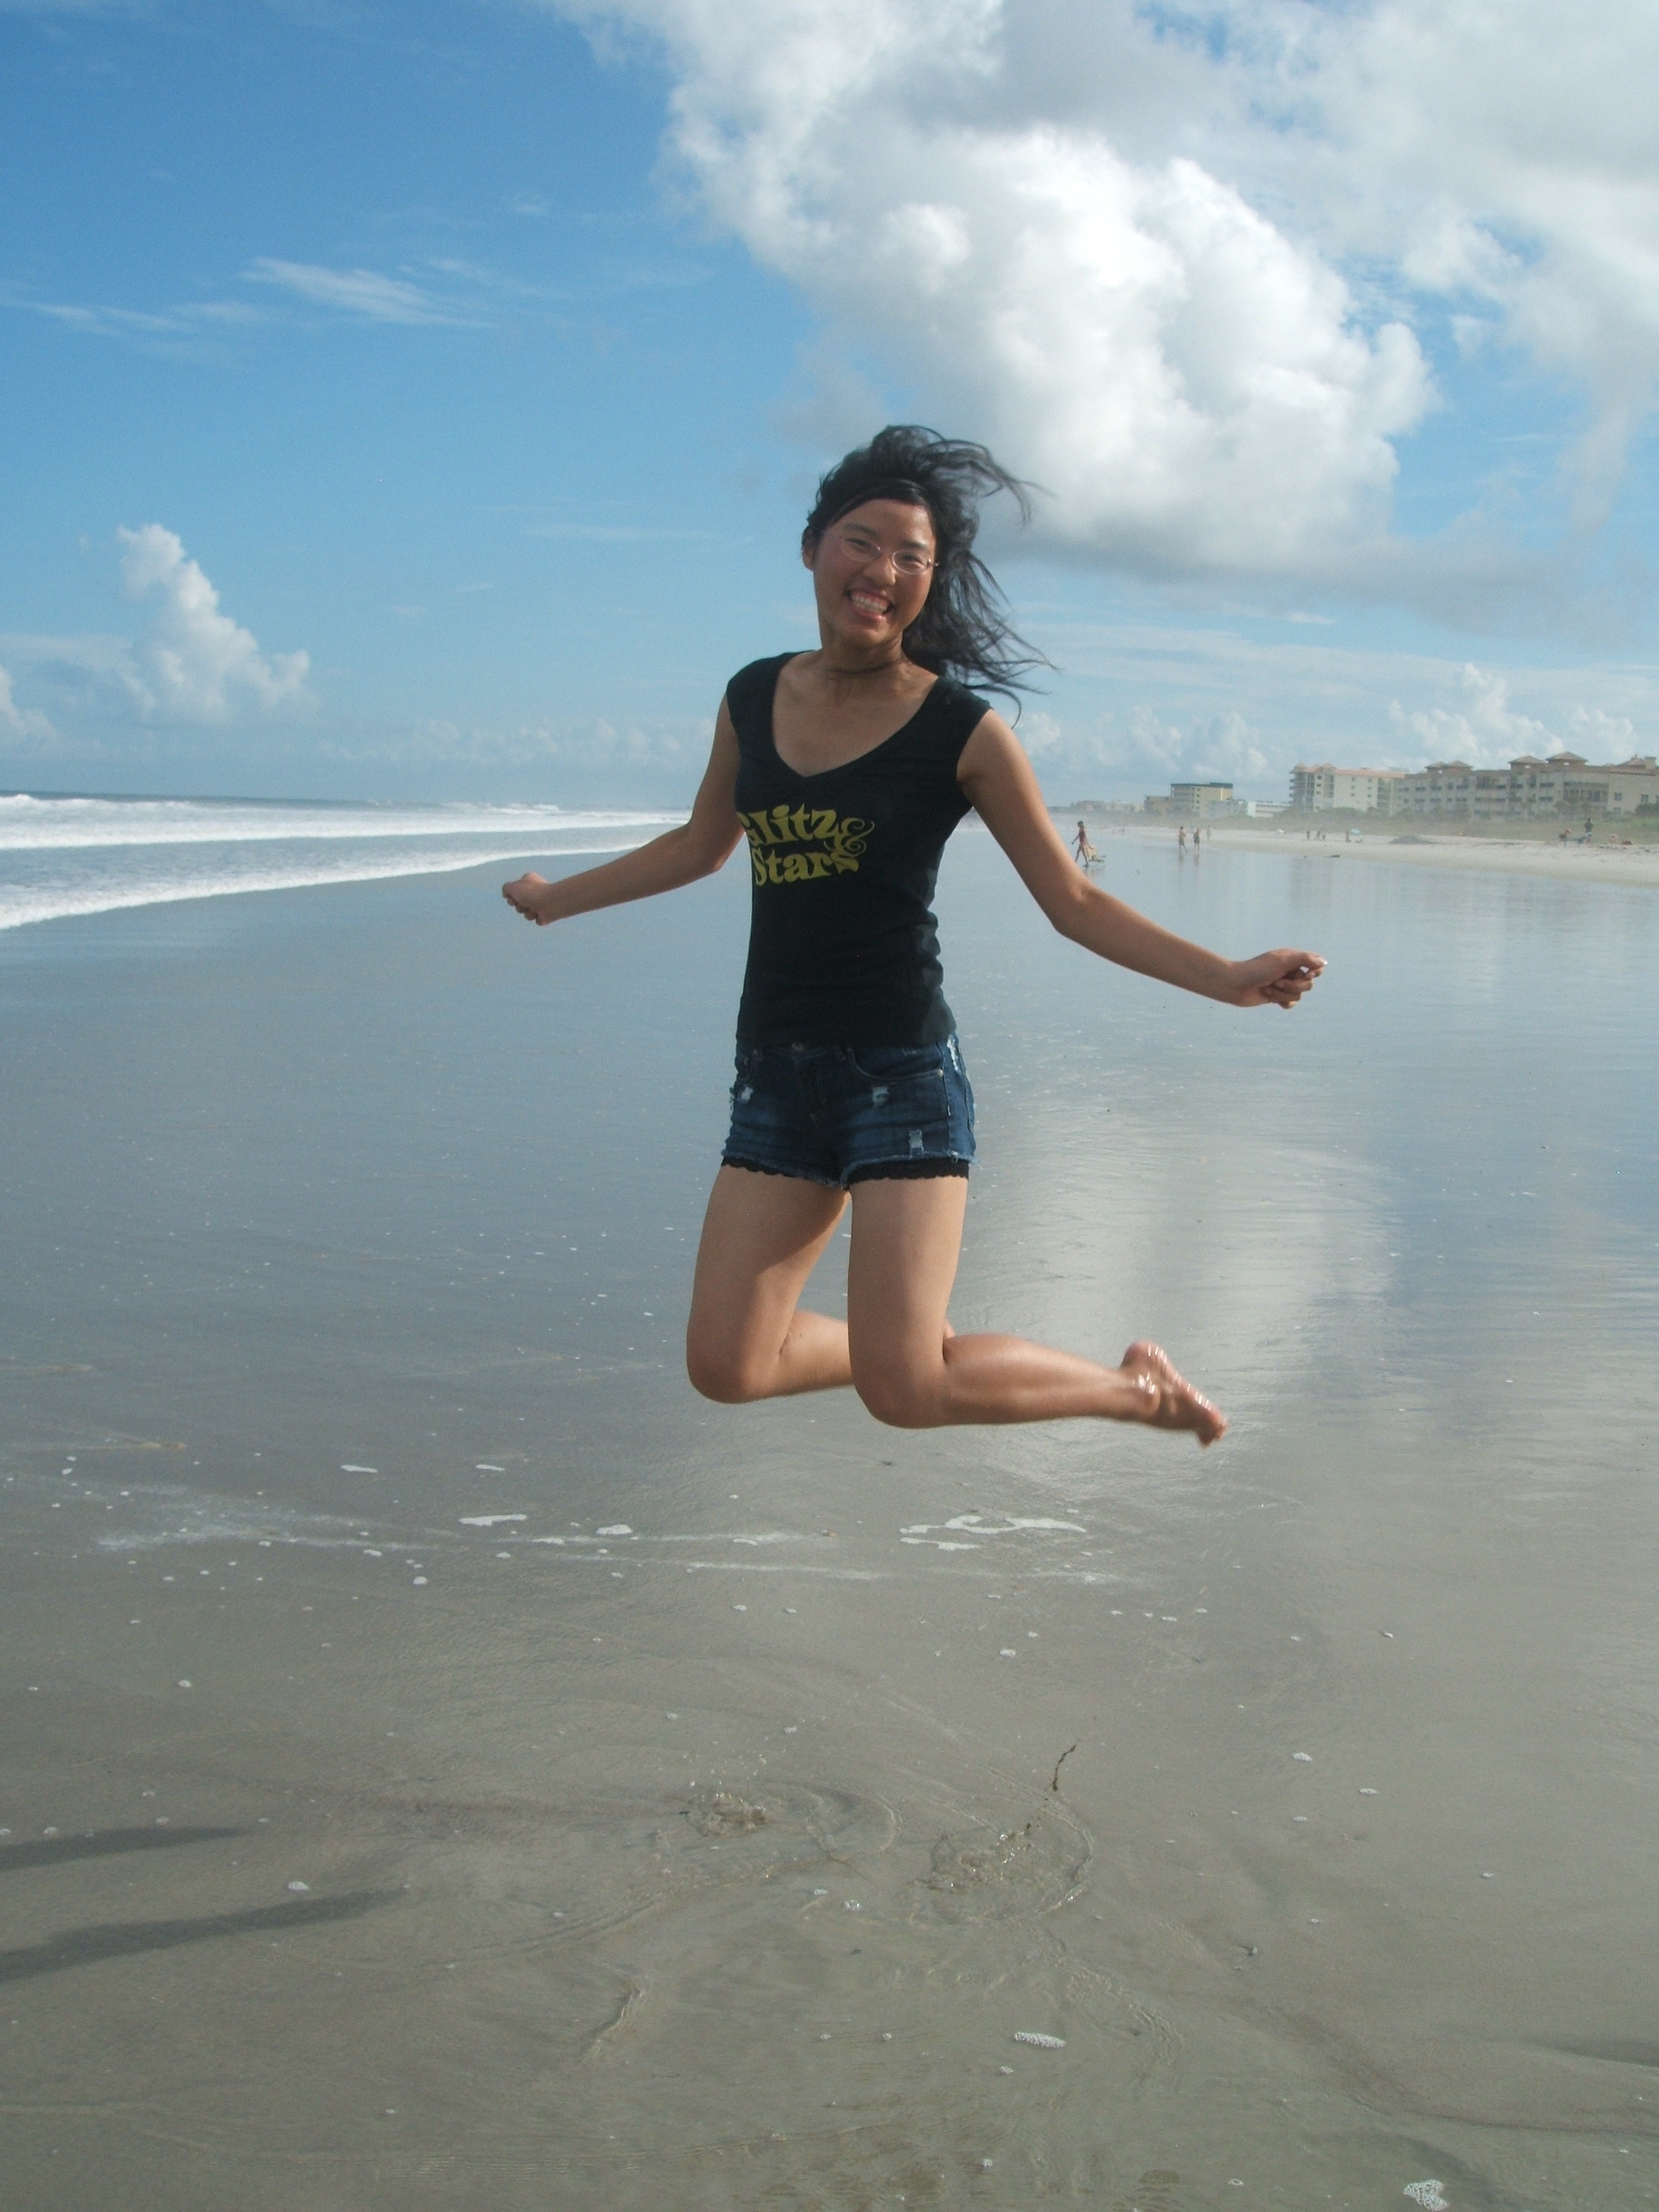 Jumping from Happiness